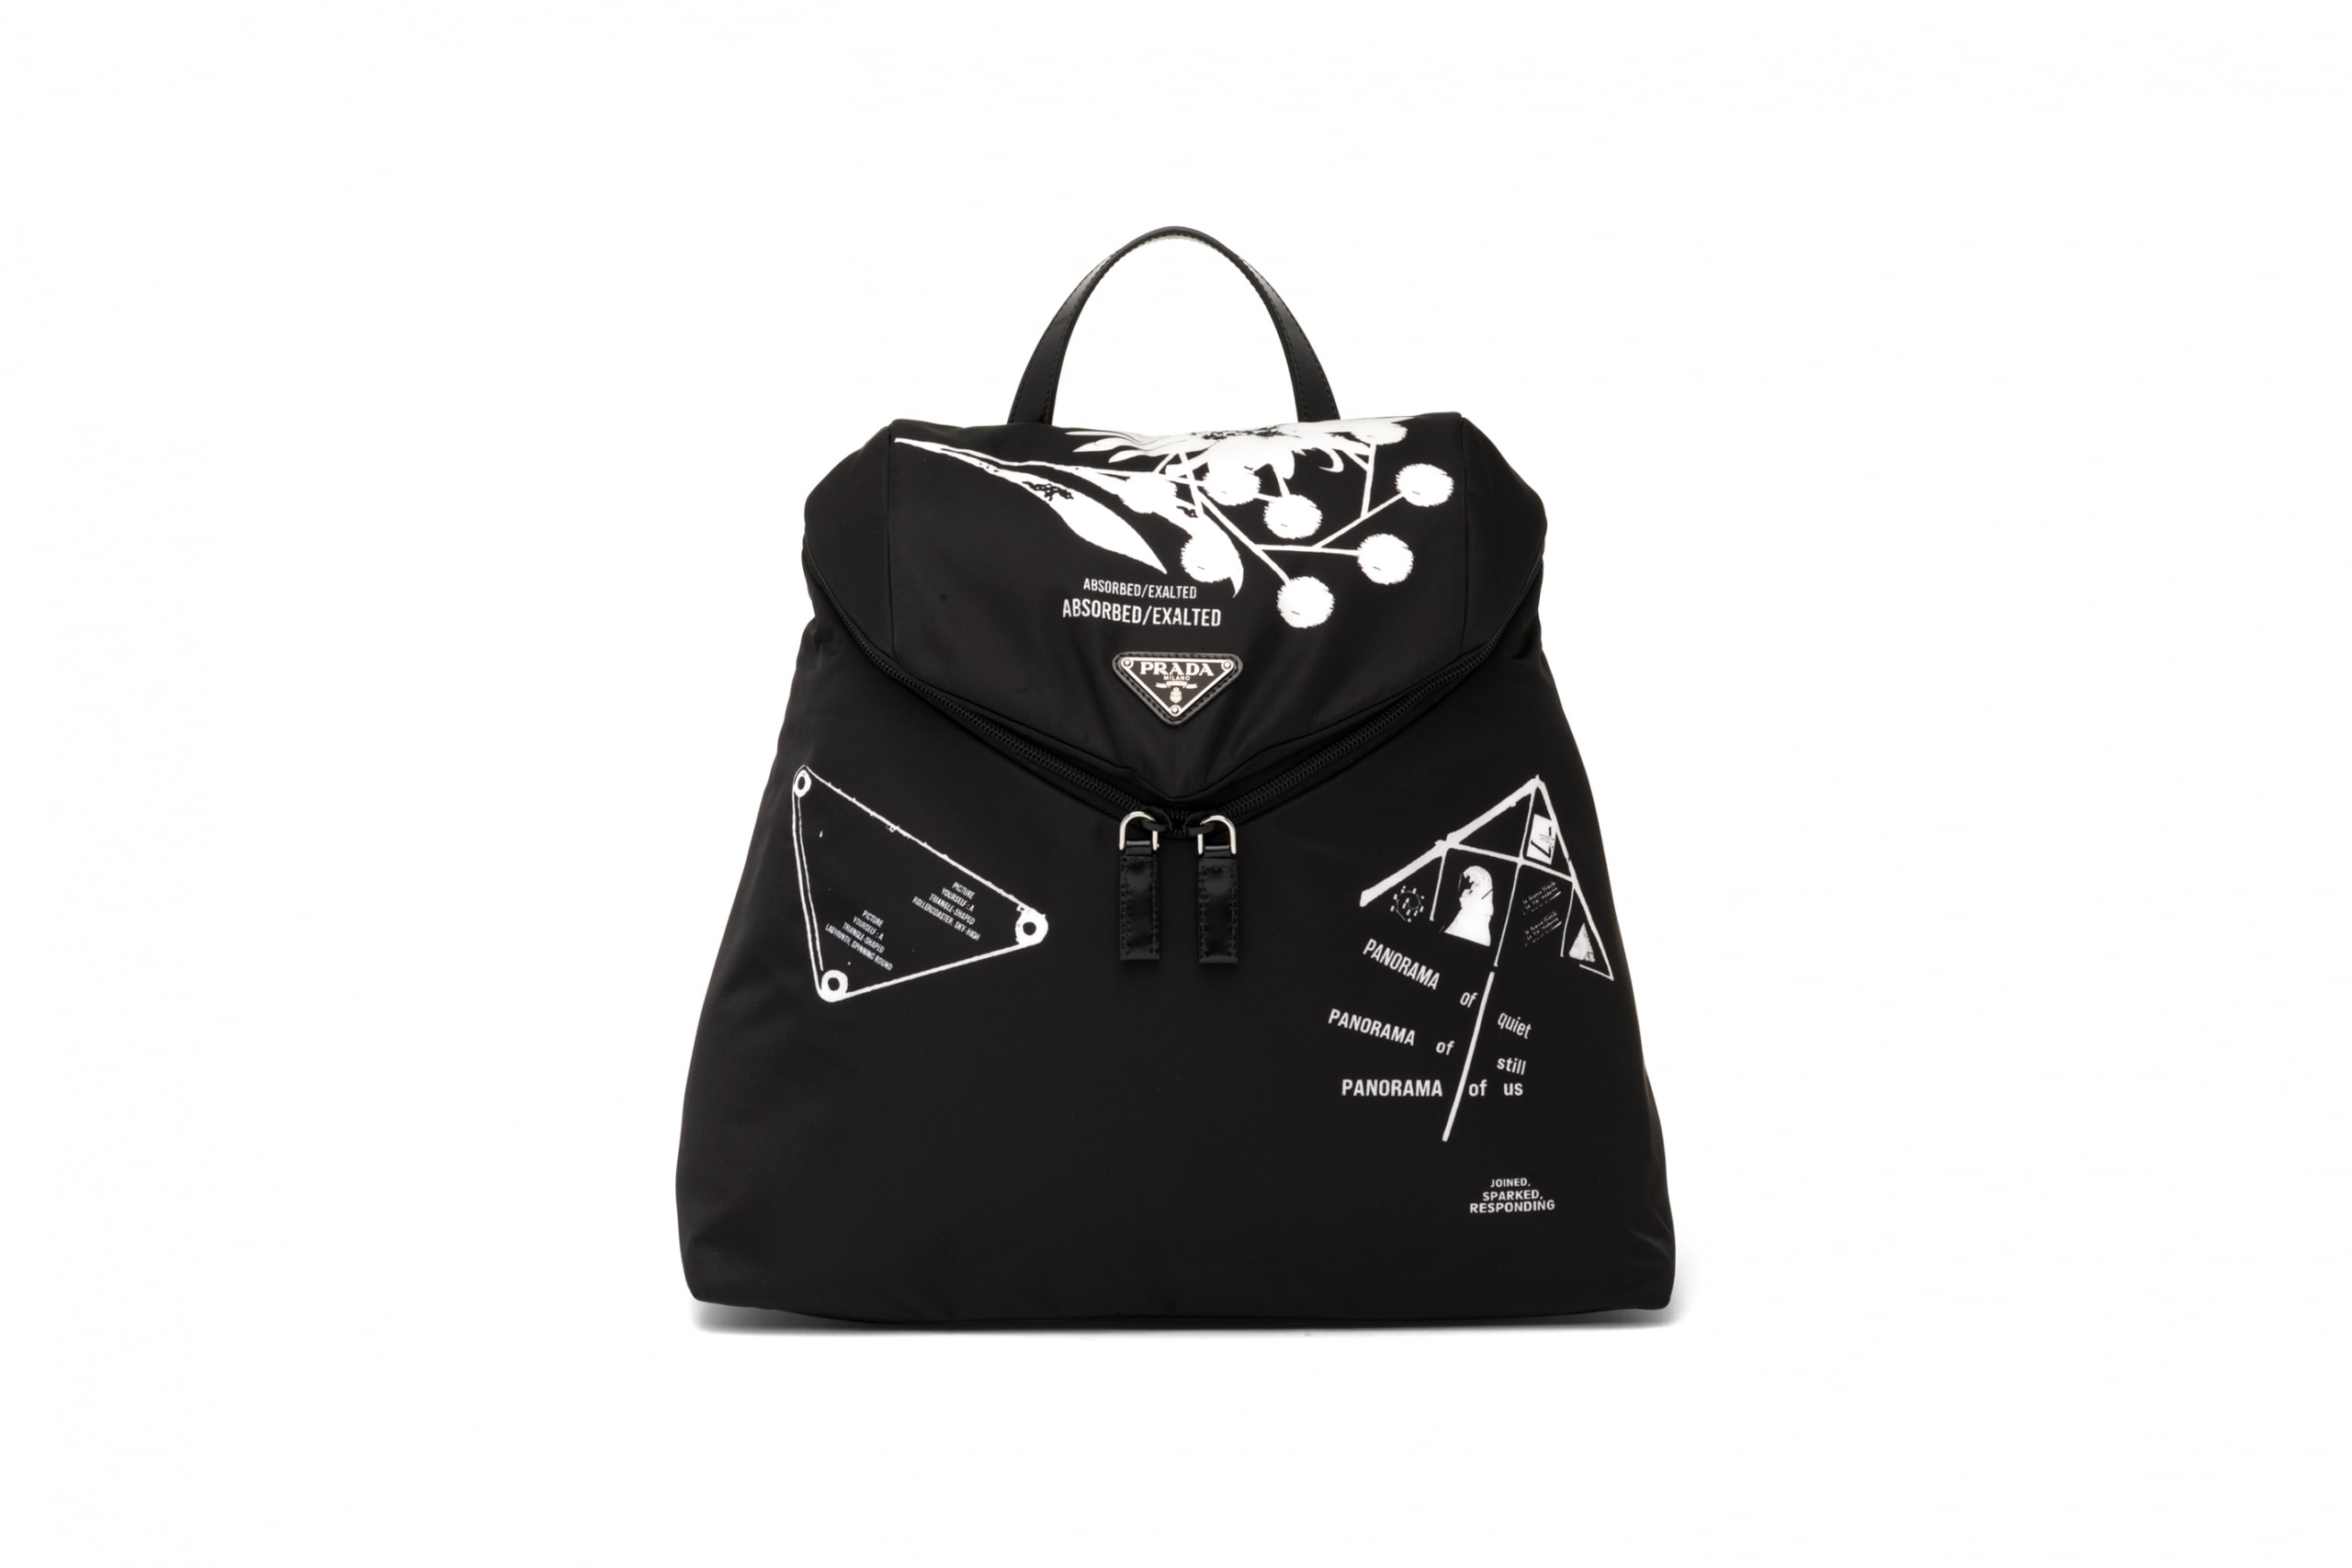 Prada Spring/Summer 2021 Accessories Collection Bags Re-Edition Nylon Cleo Purse 